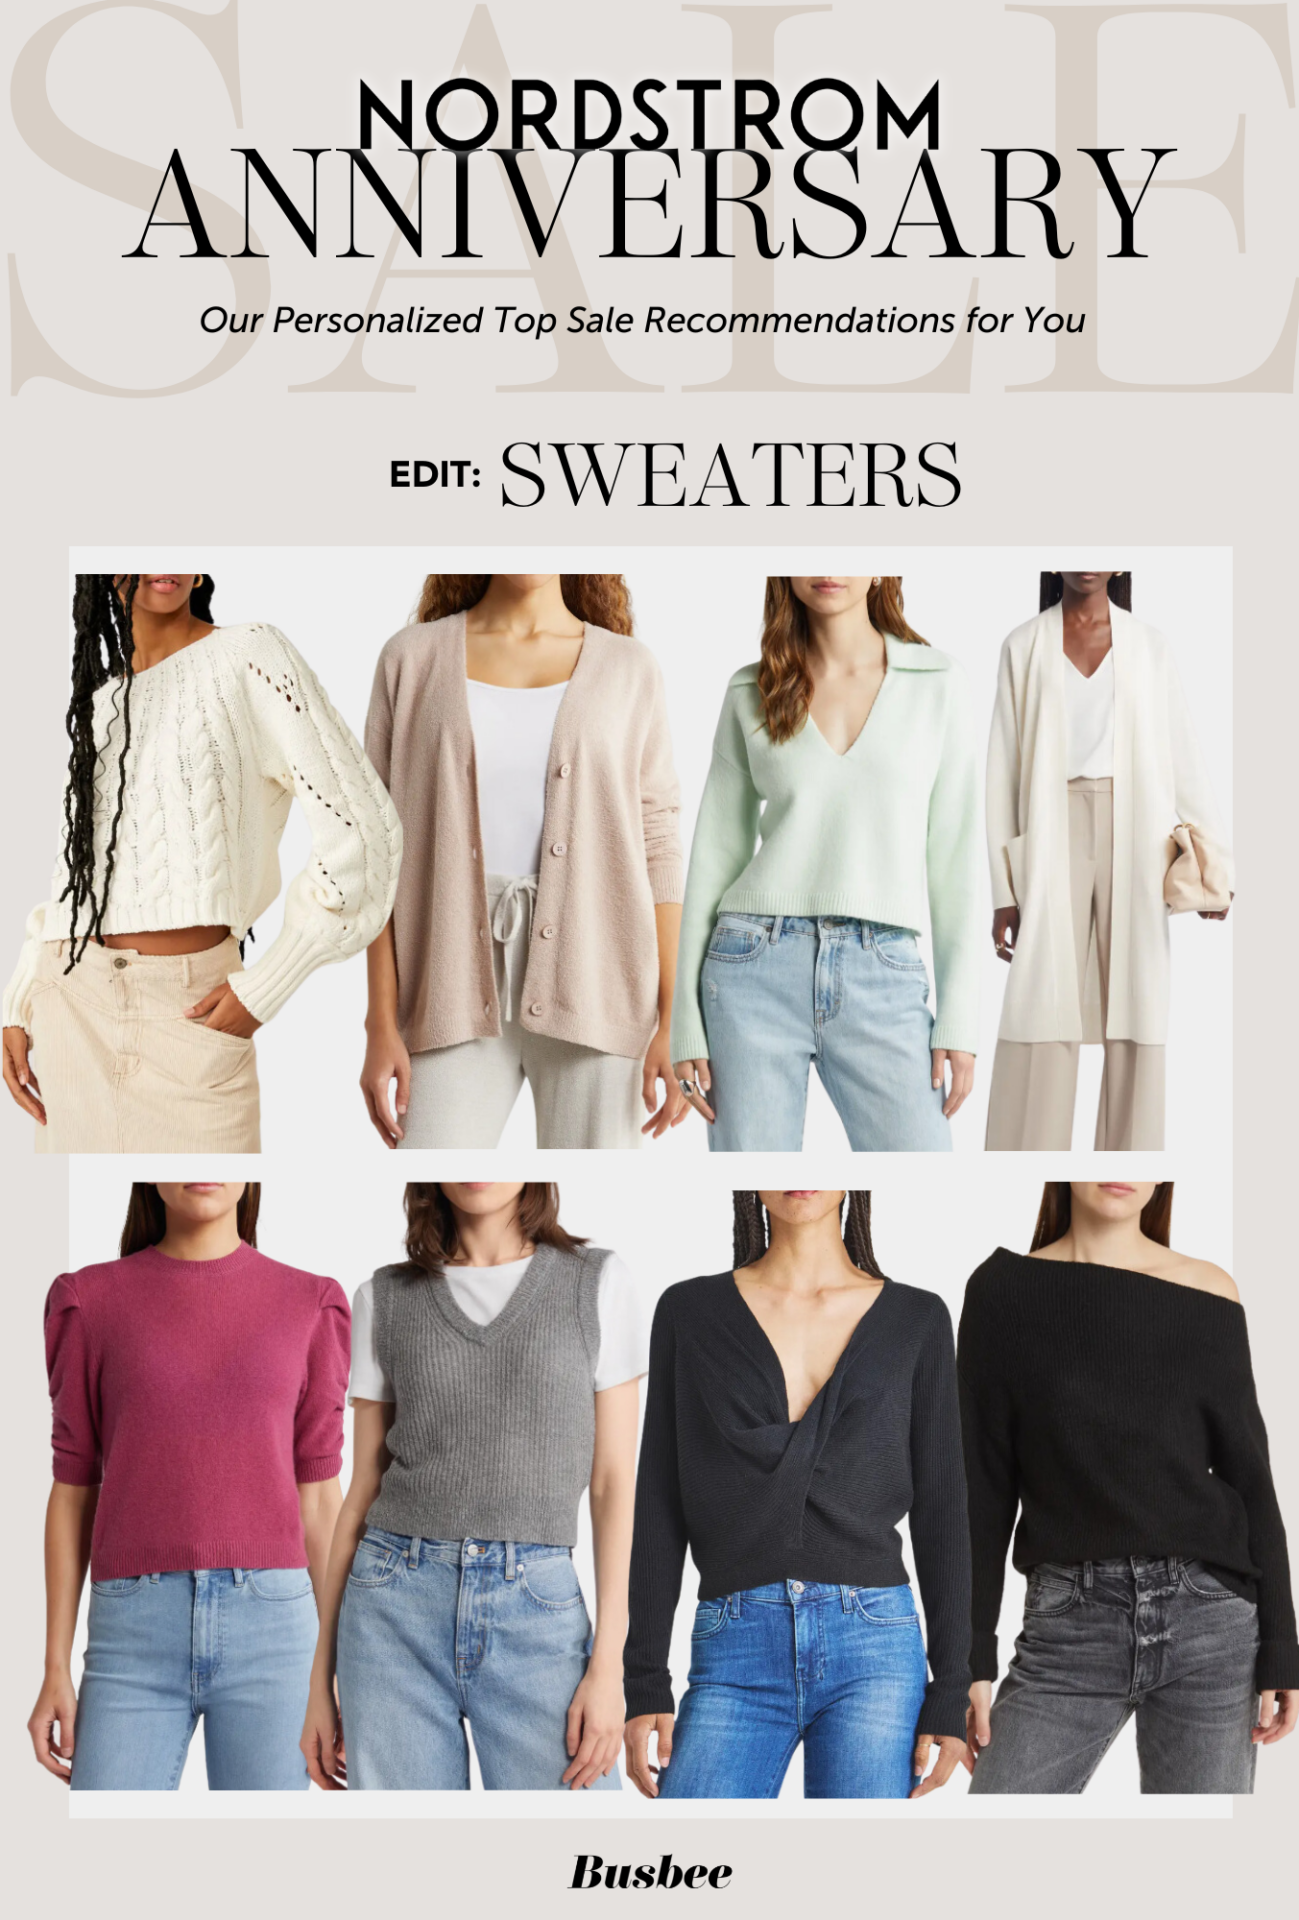 Nordstrom Anniversary Sale sweaters